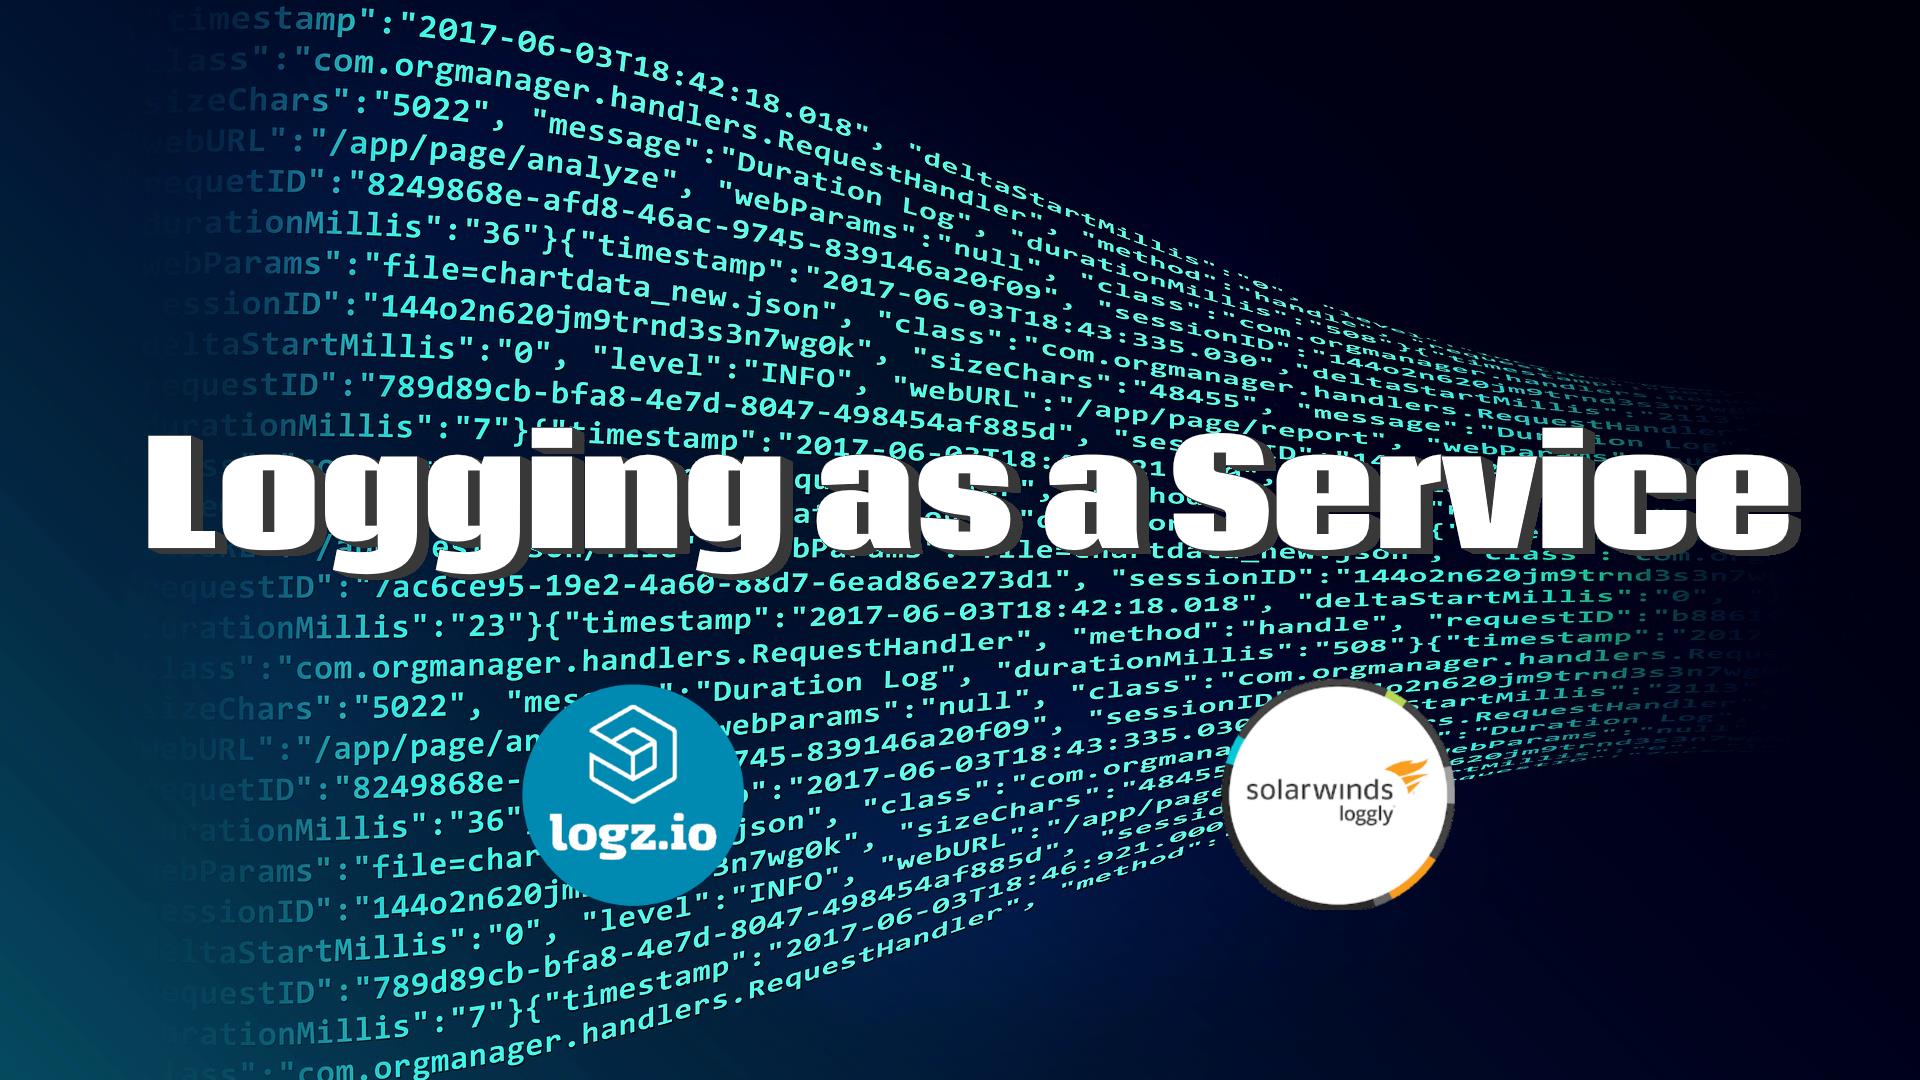 Logging as a Service with Loggly and Logz.io